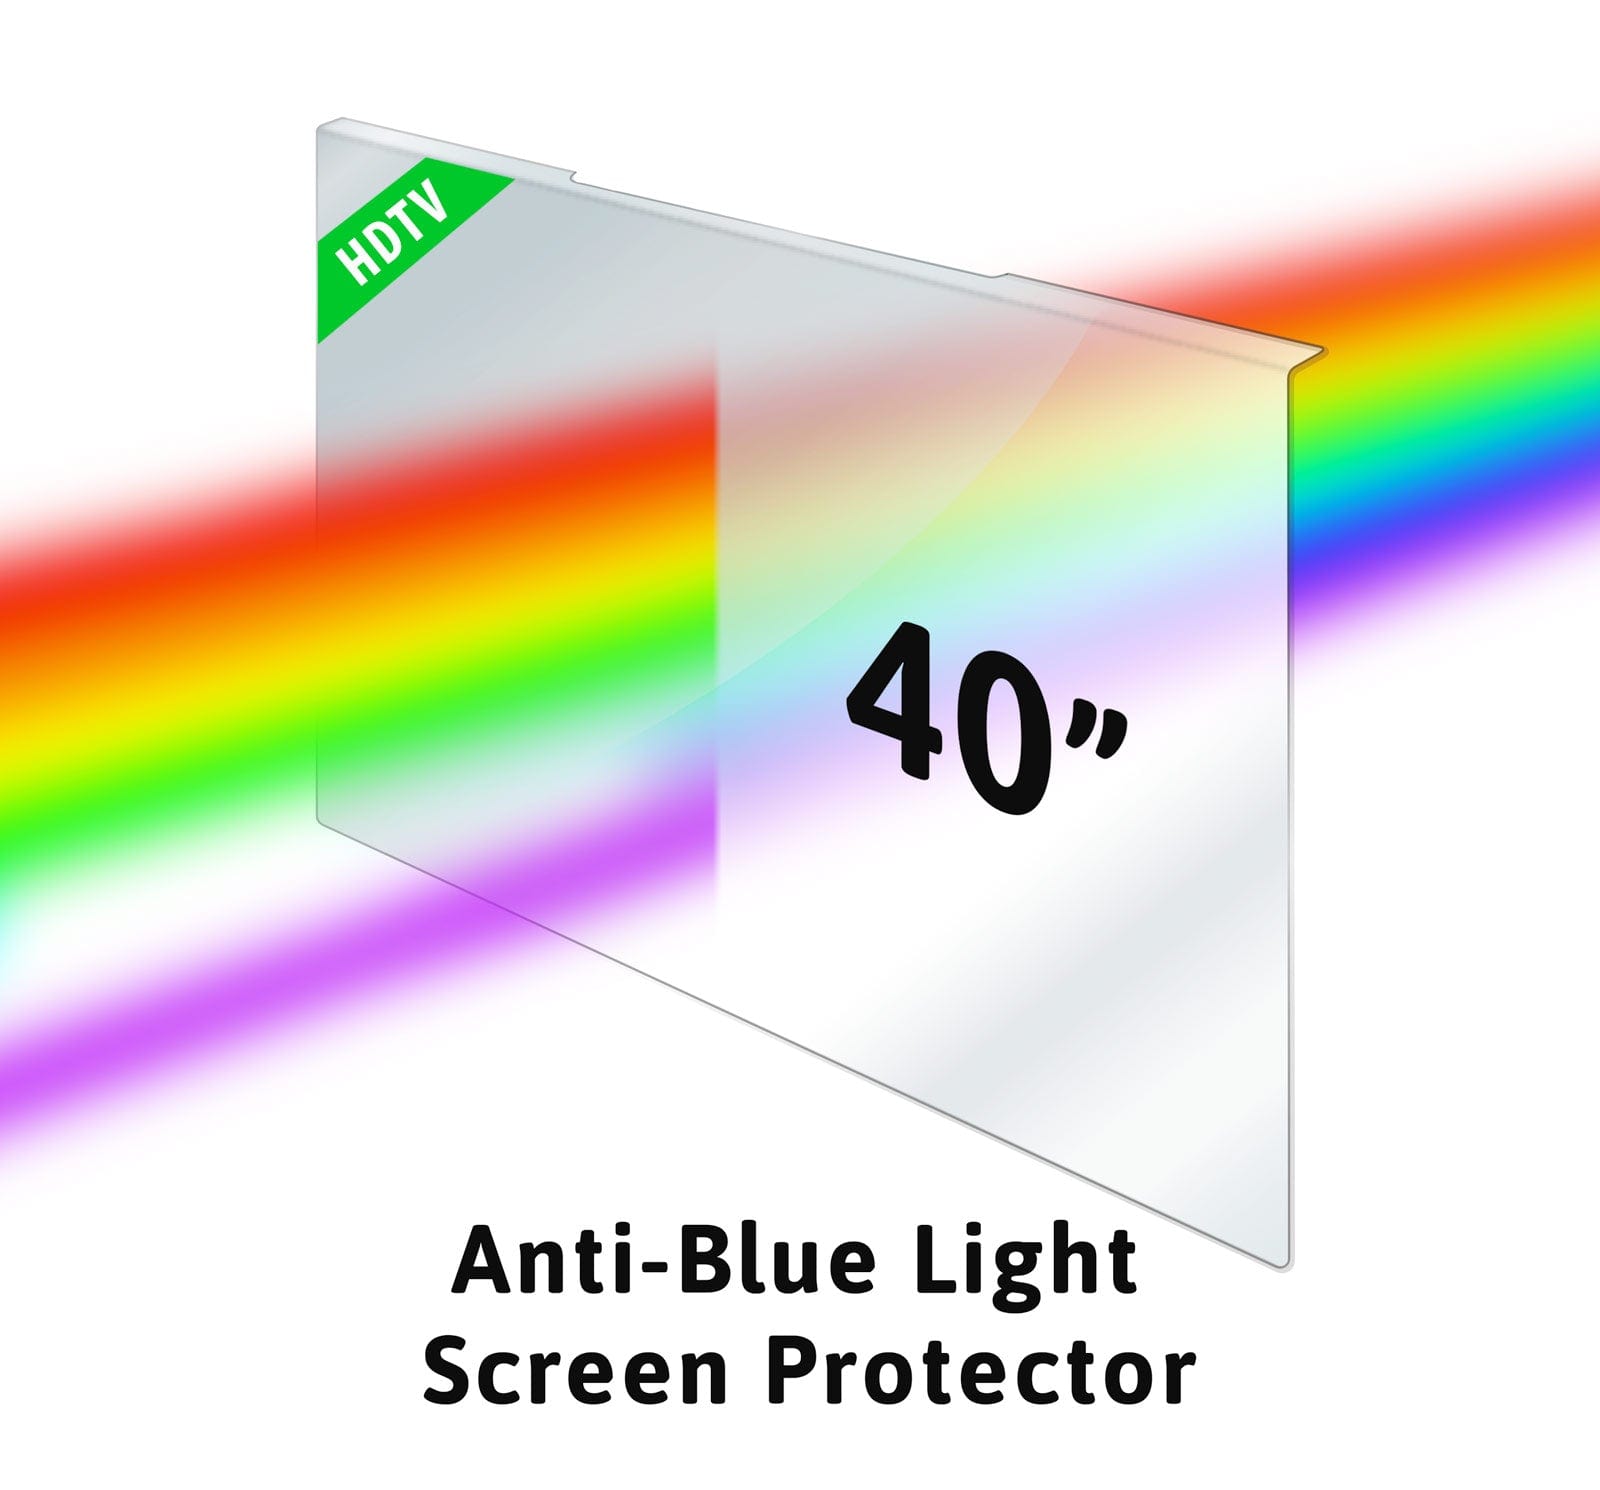 ZeroDamage Anti-Blue Light TV Screen Protector for Most 40" TVs - Clear